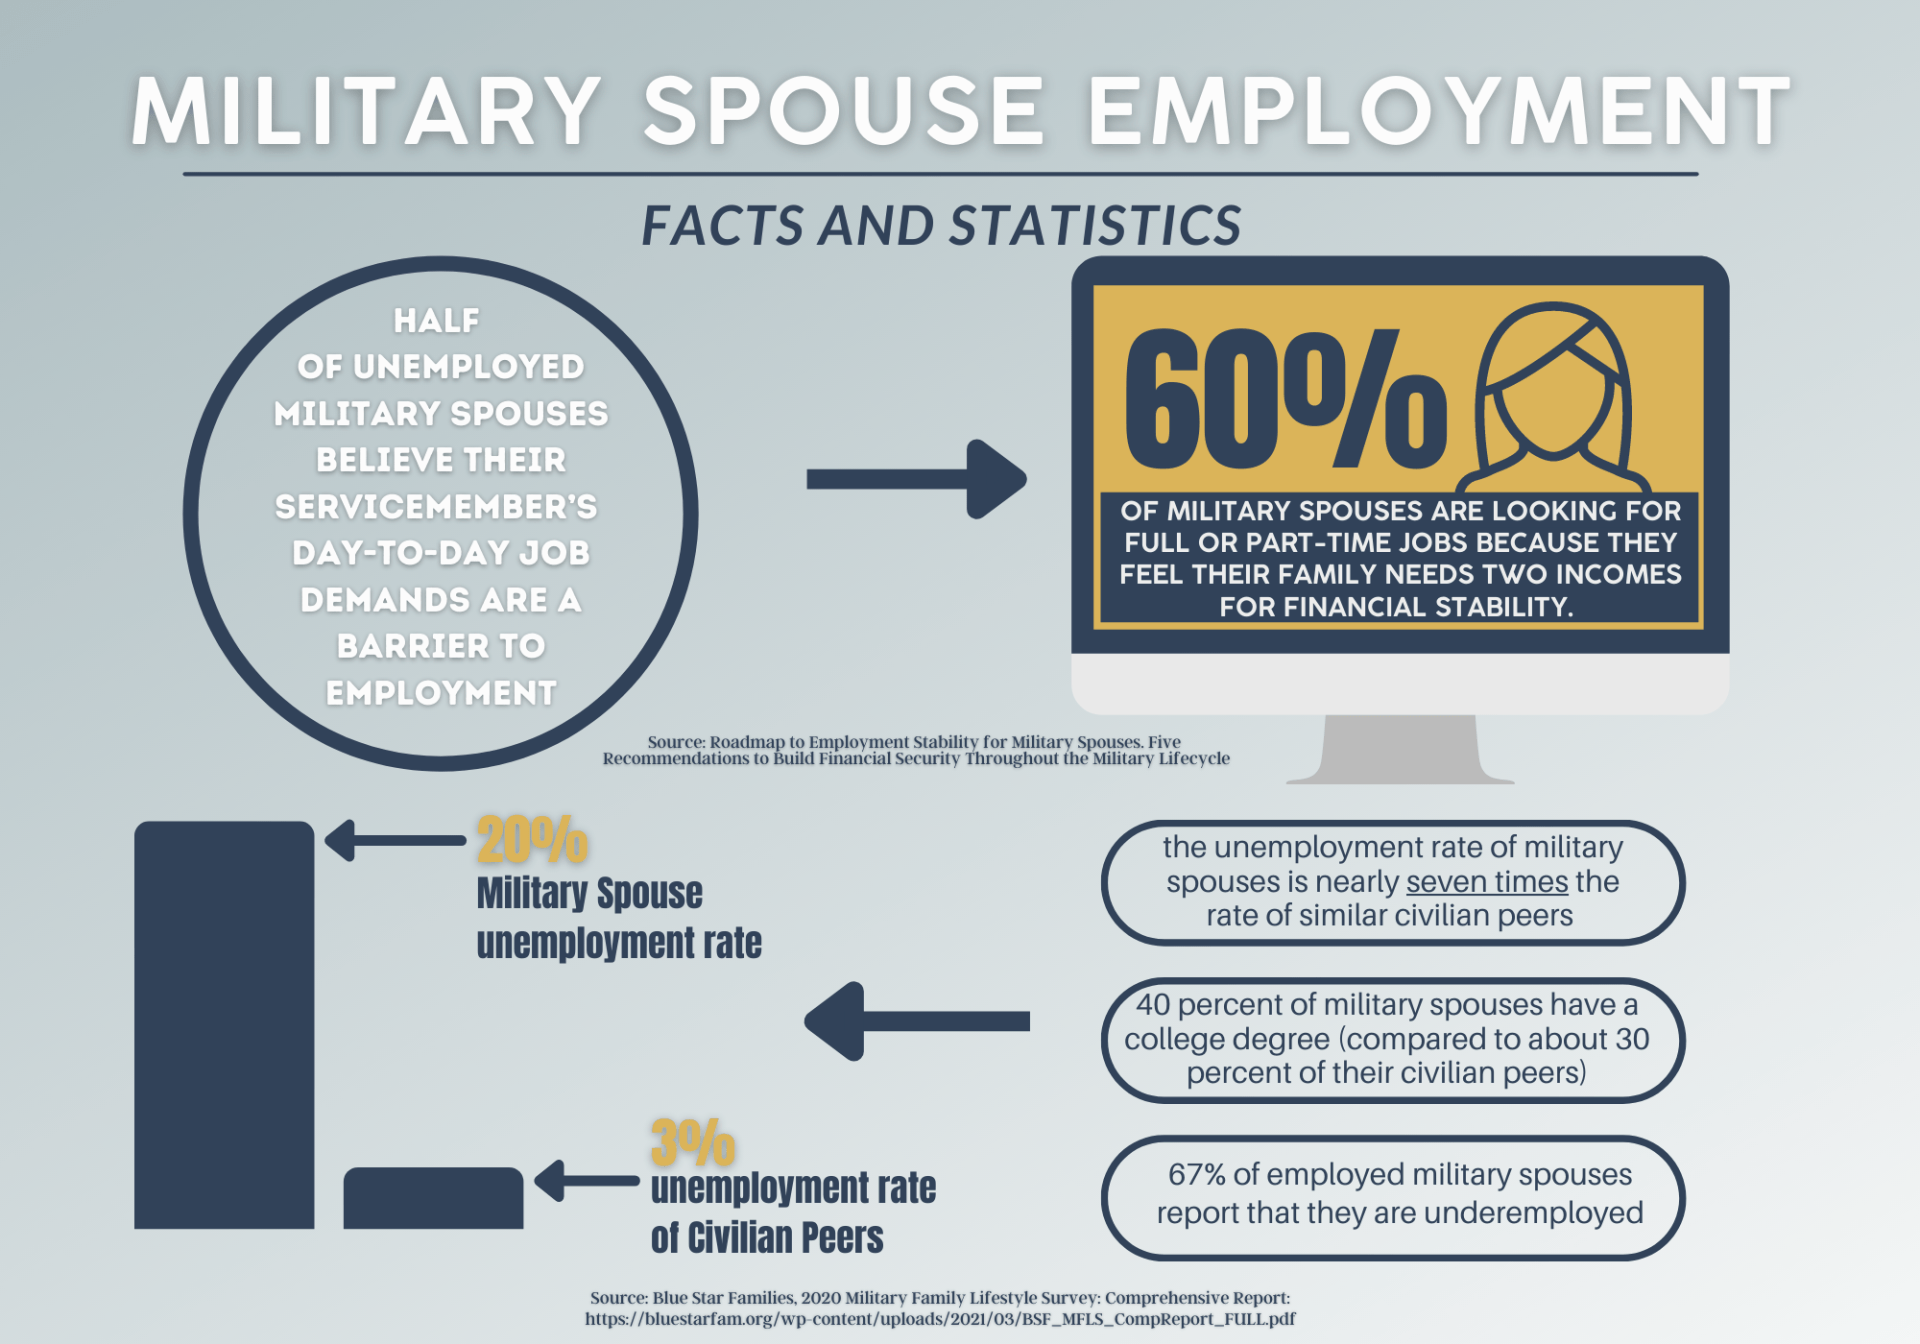 An infographic about military spouse employment facts and statistics.